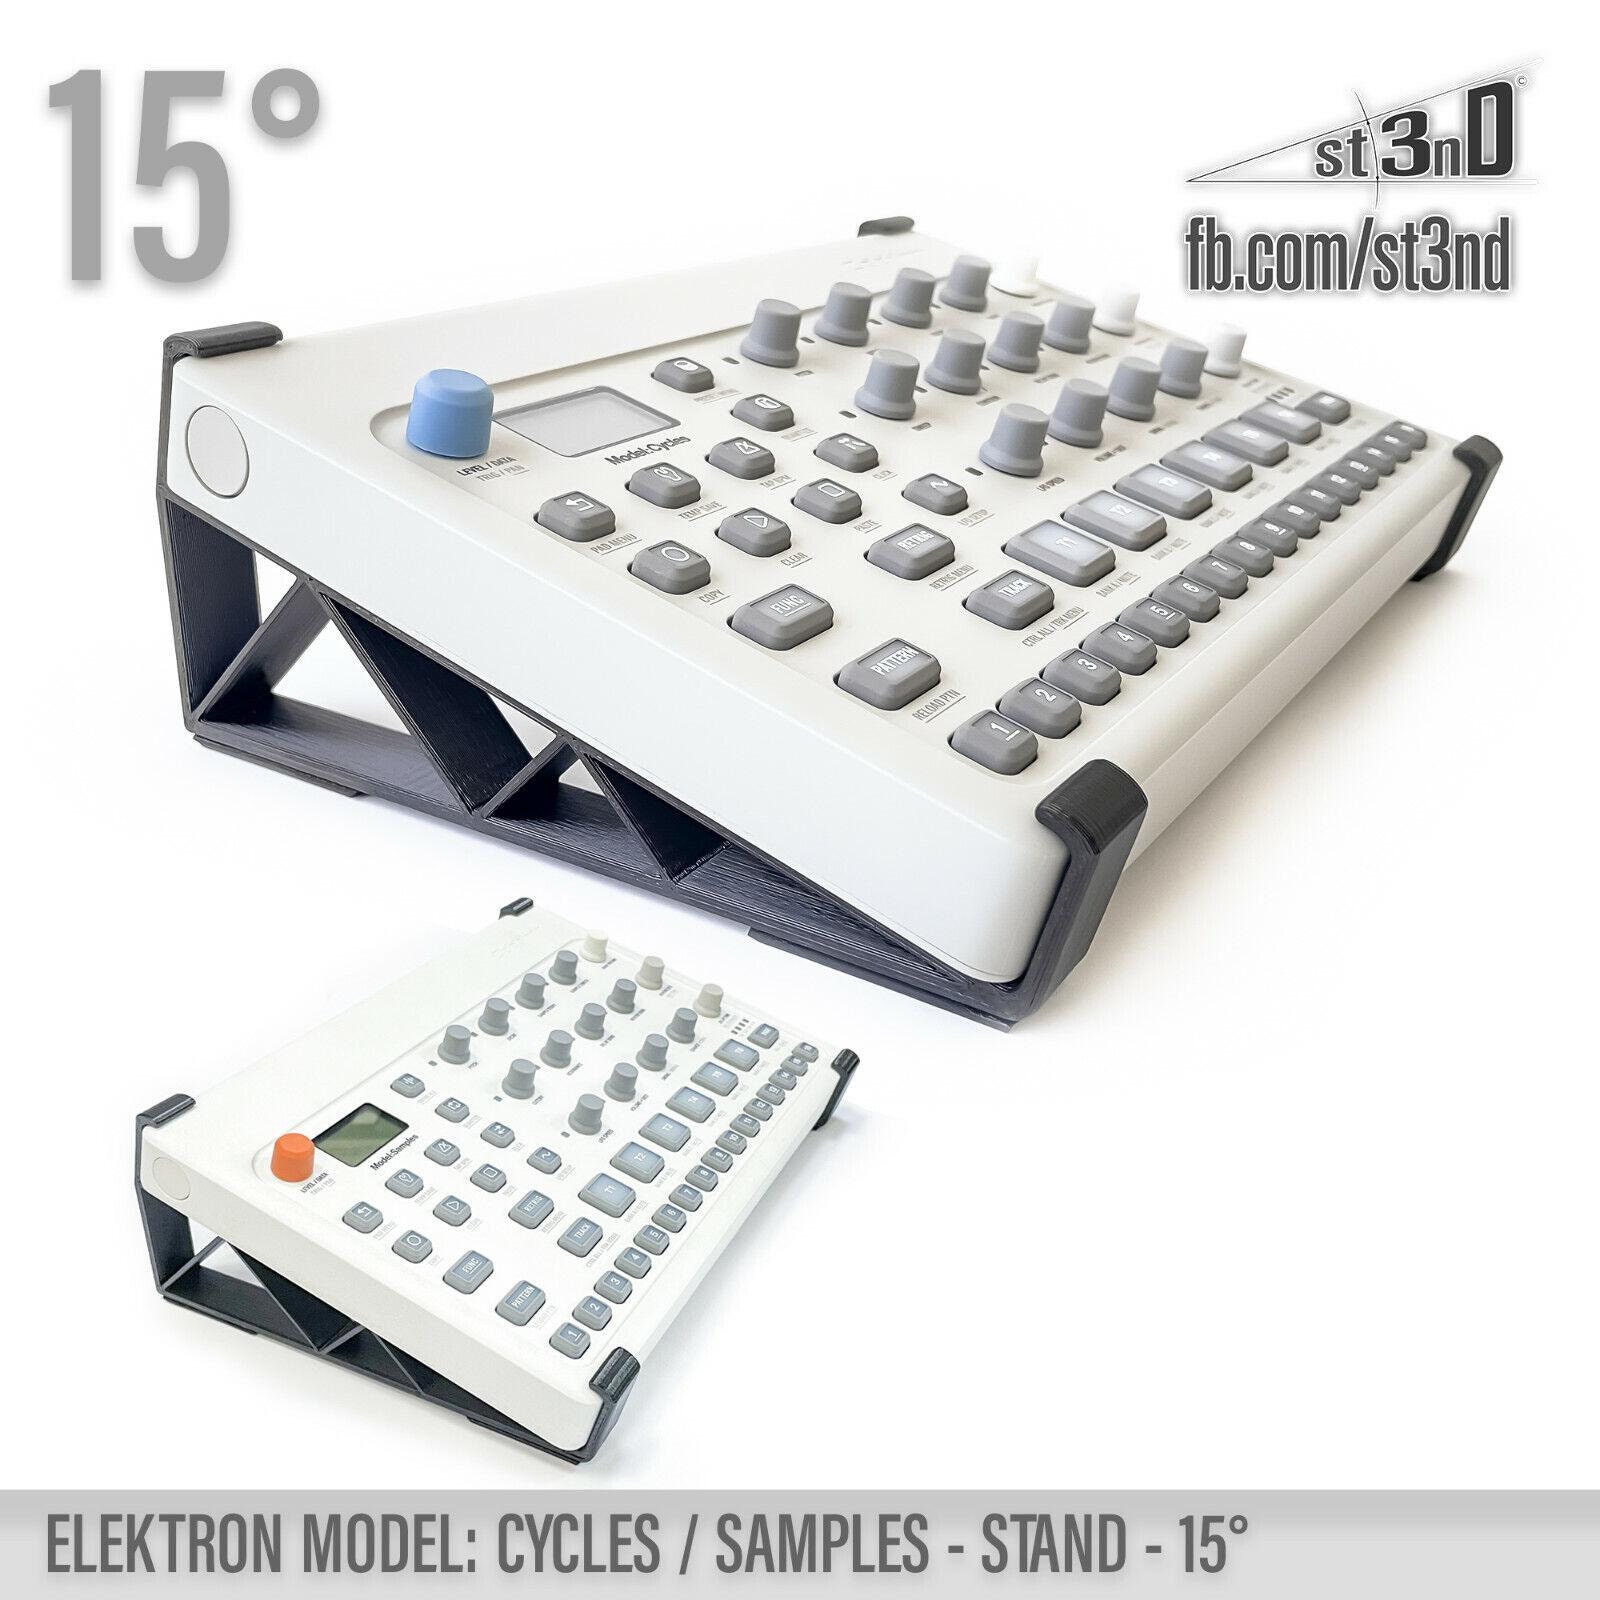 ELEKTRON MODEL Cycles samples Stand  Degrees 3d Printed   Etsy